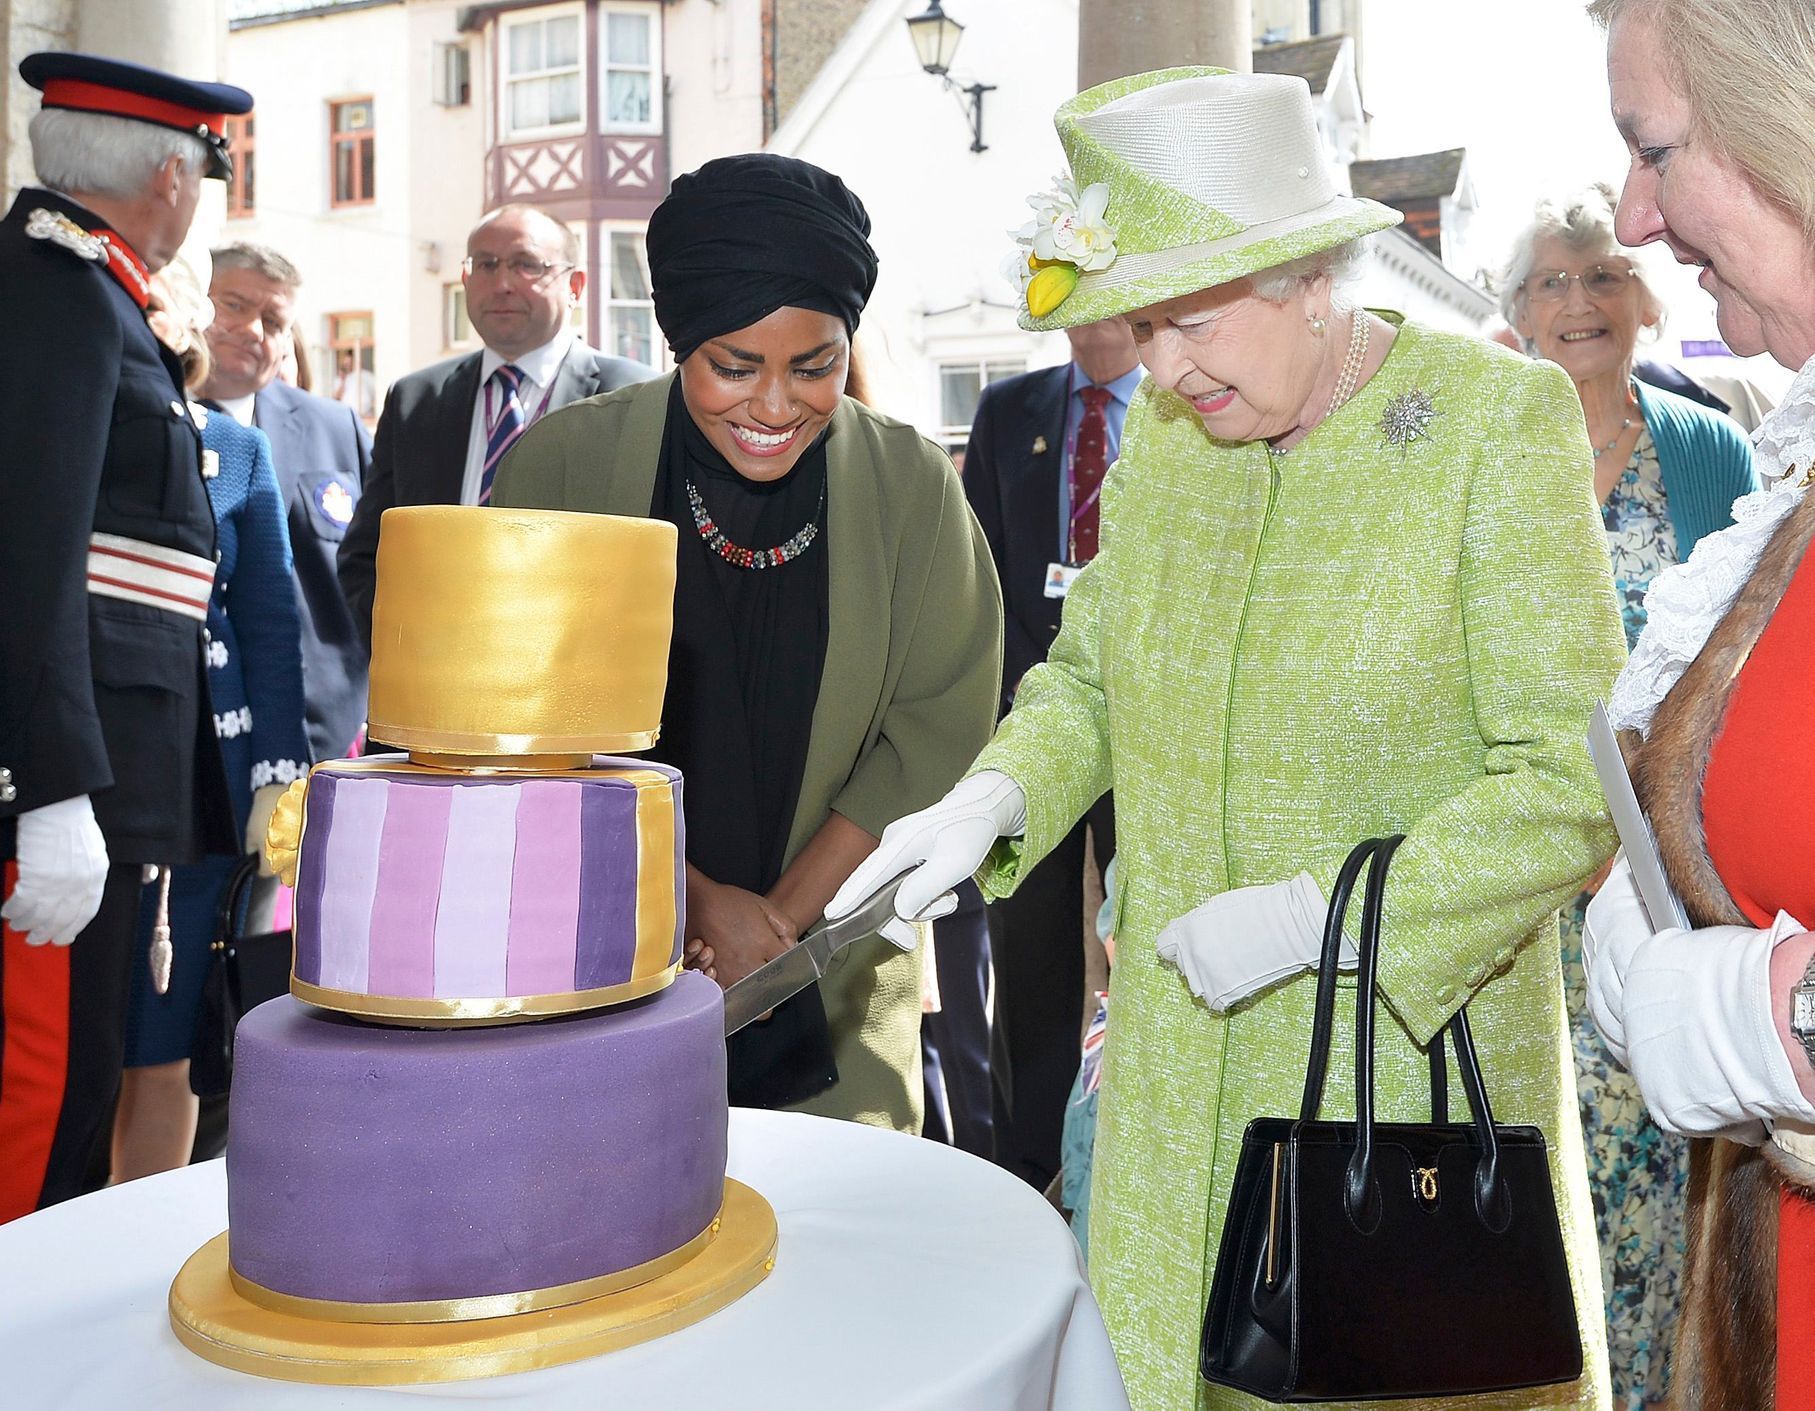 Britain's Queen Elizabeth cuts the cake Nadiya Hussain, winner of the Great British Bake Off baked for her, as she walks through Windsor on her 90th Birthday, in Windsor